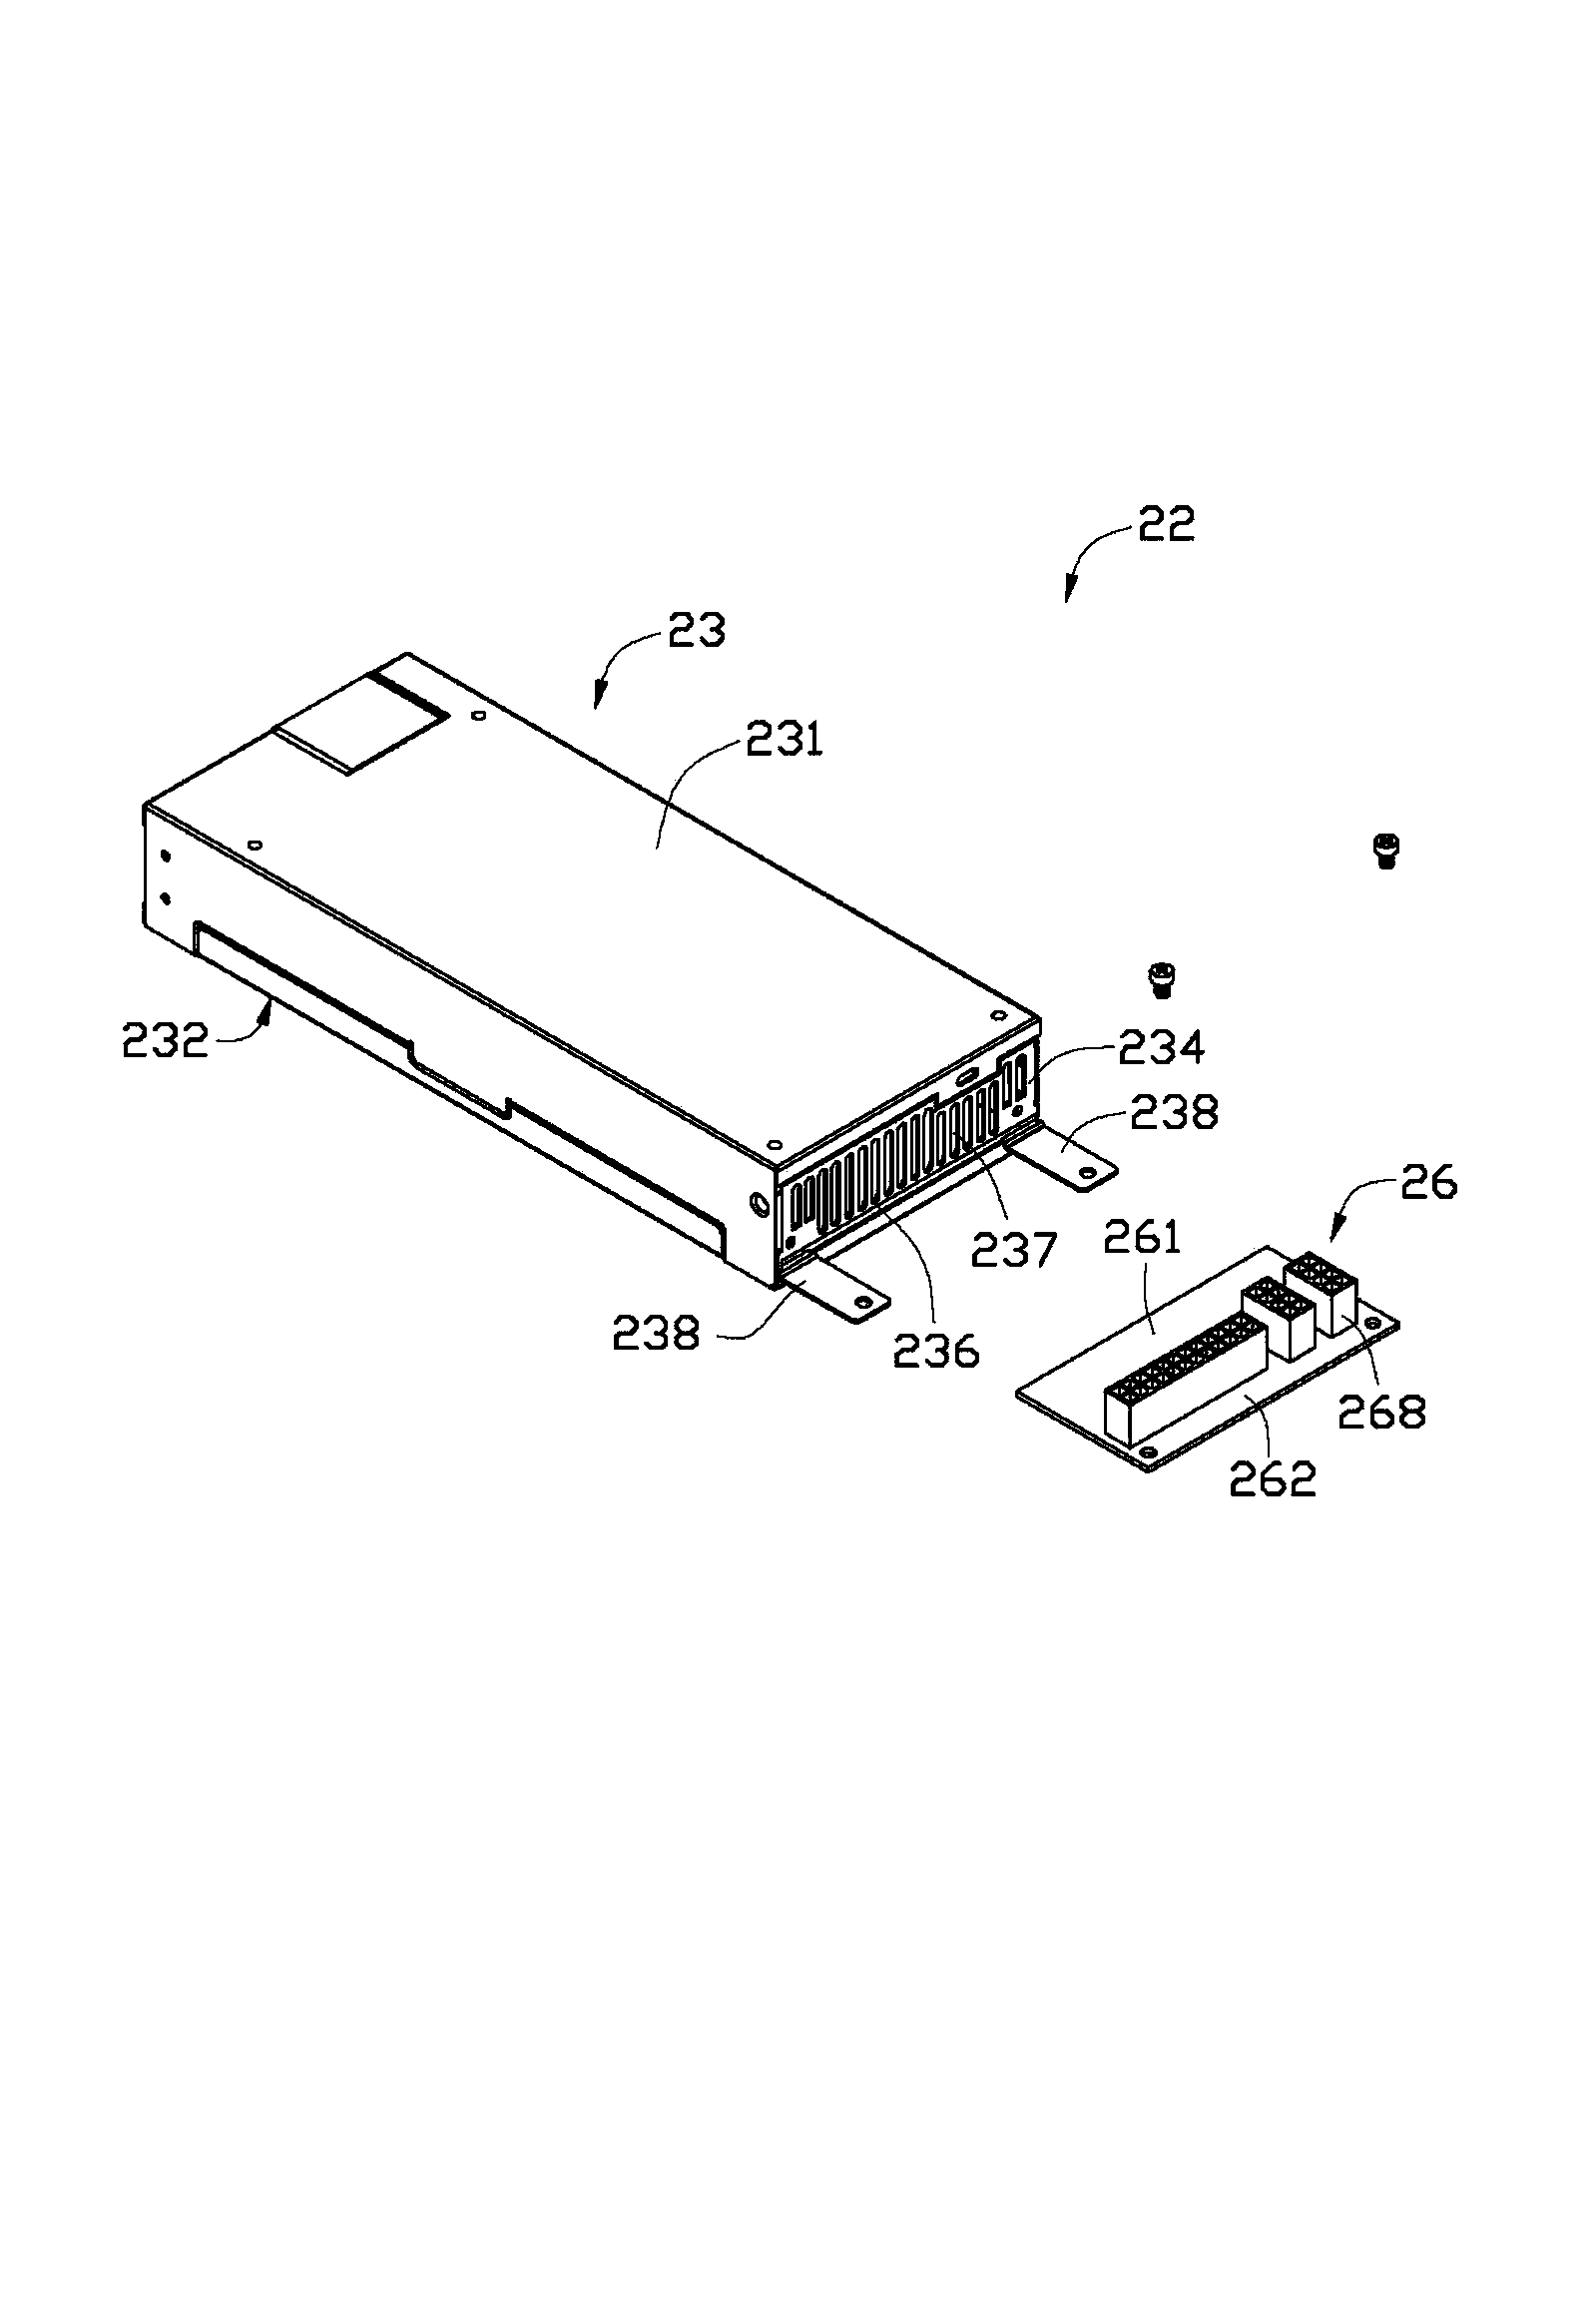 Electronic device and electronic part having connector